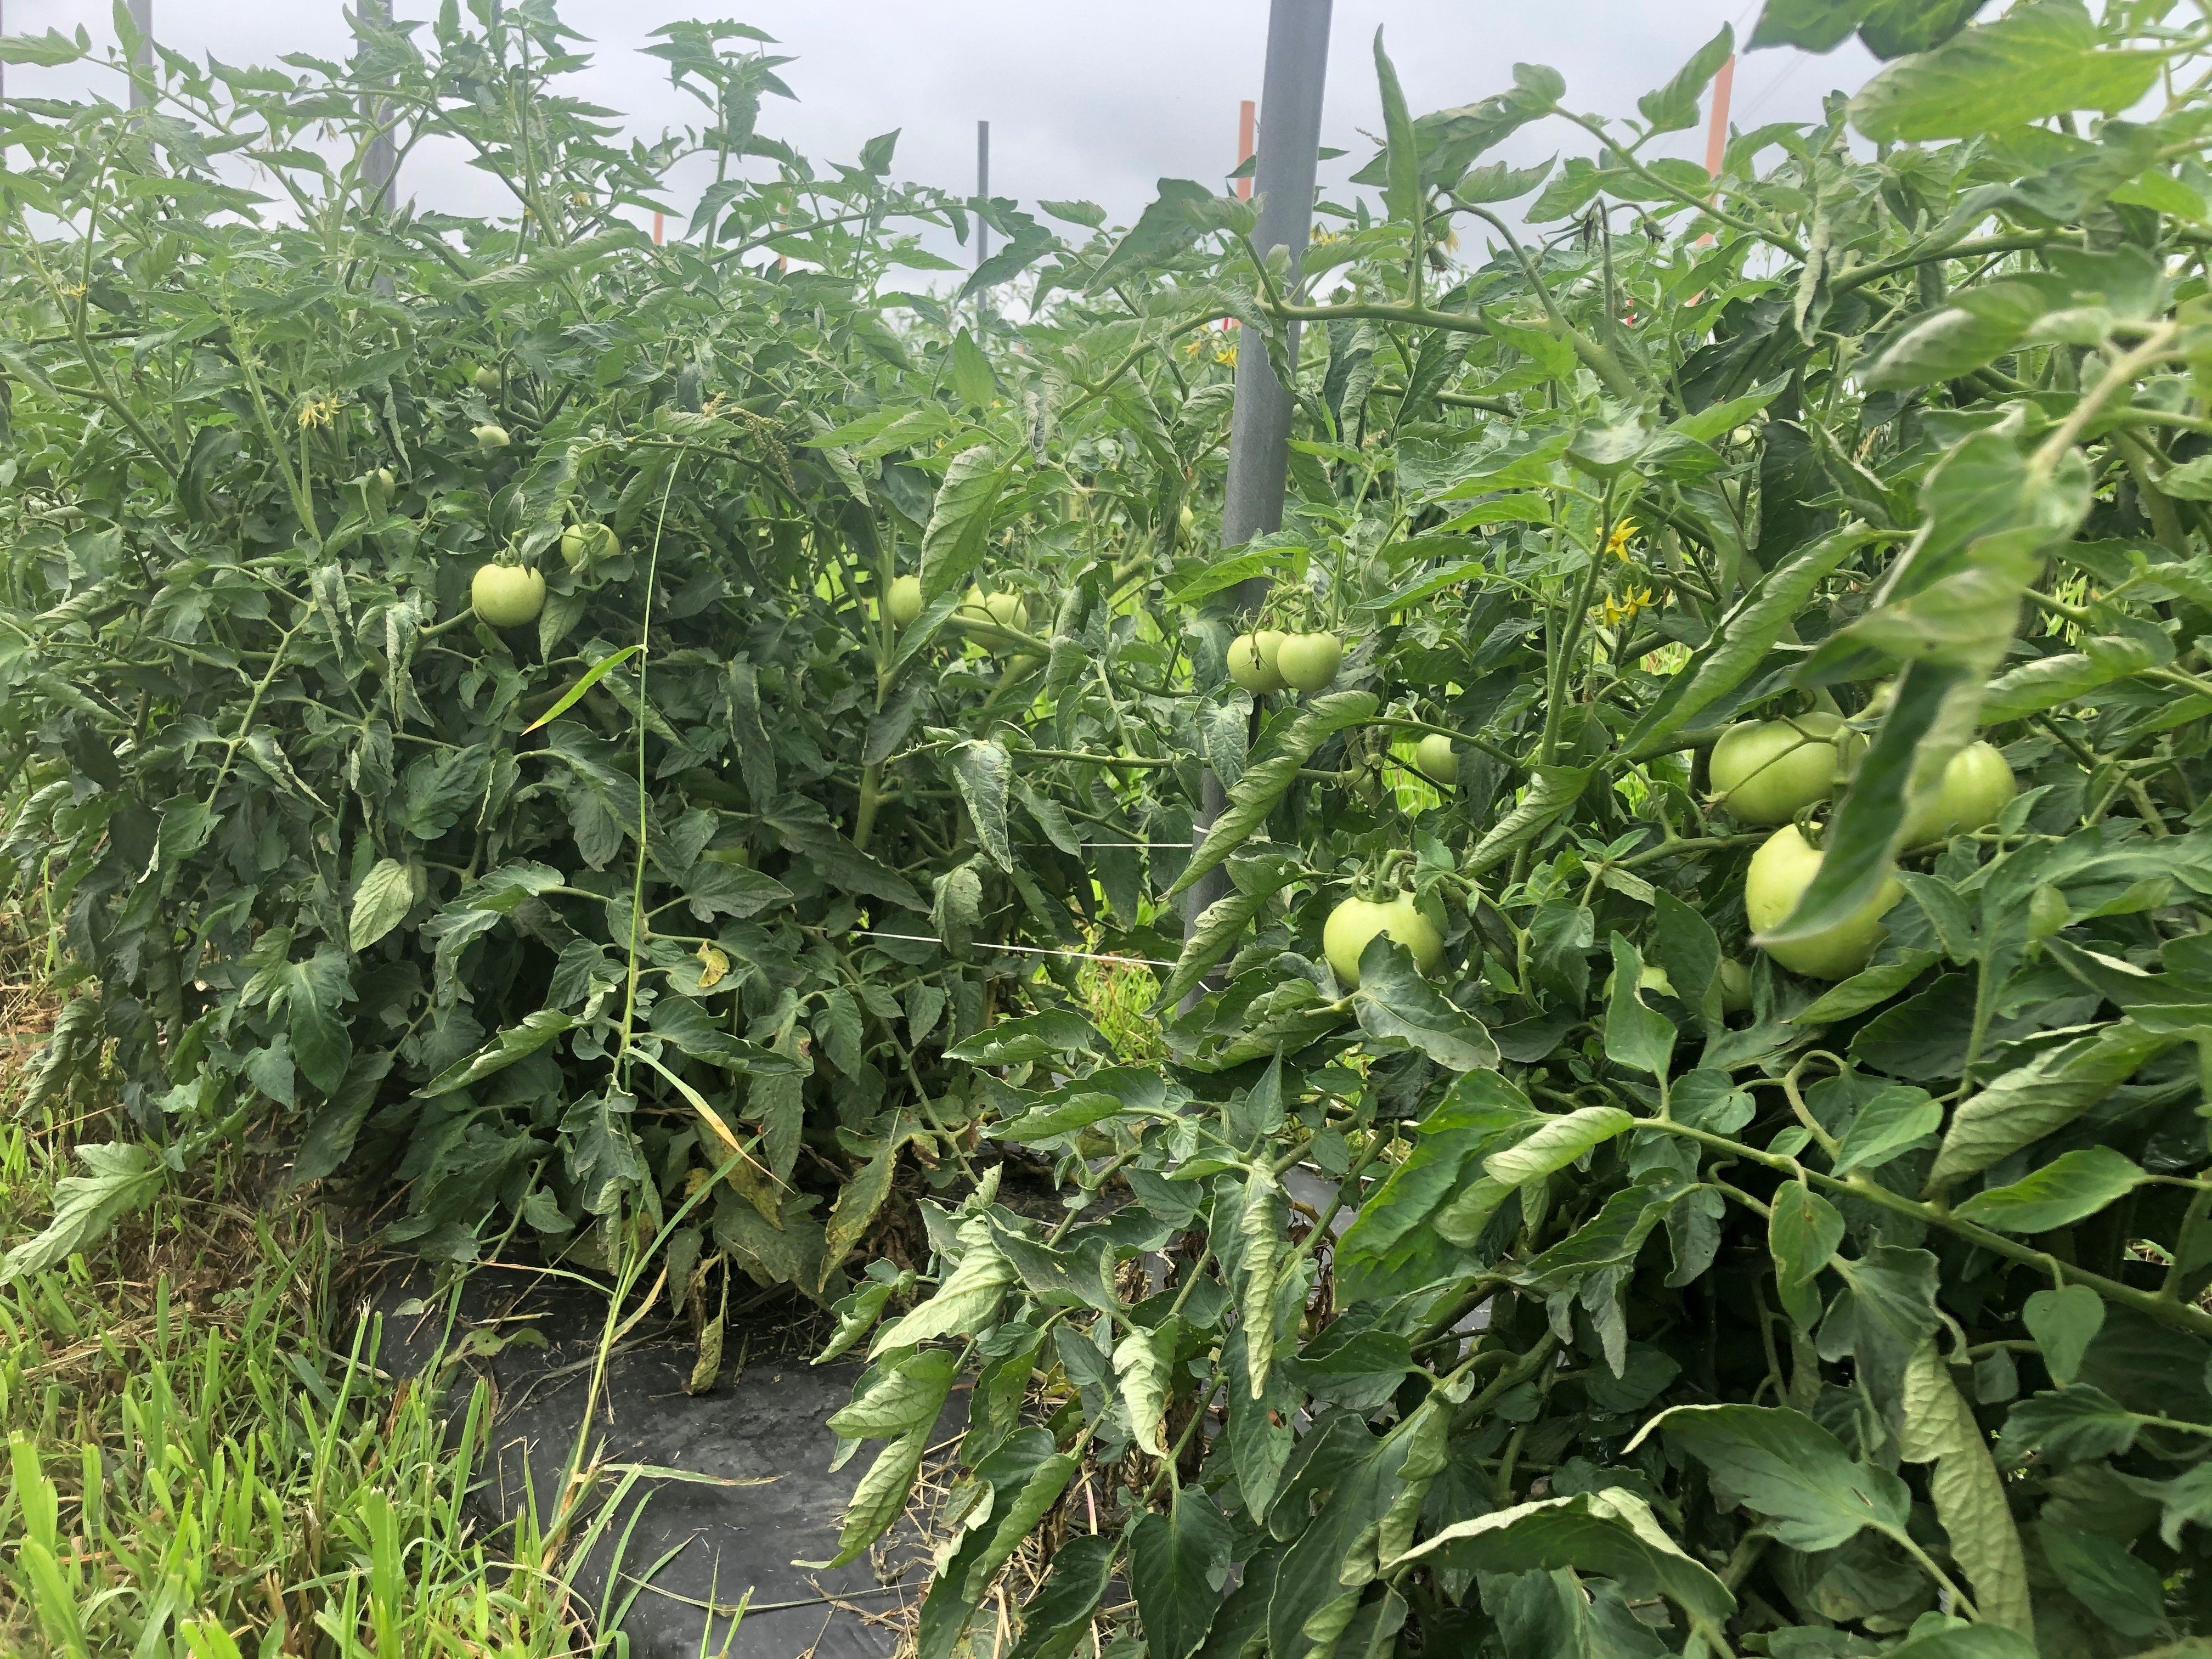 Next Happening: Farm Happenings for July 18, 2020